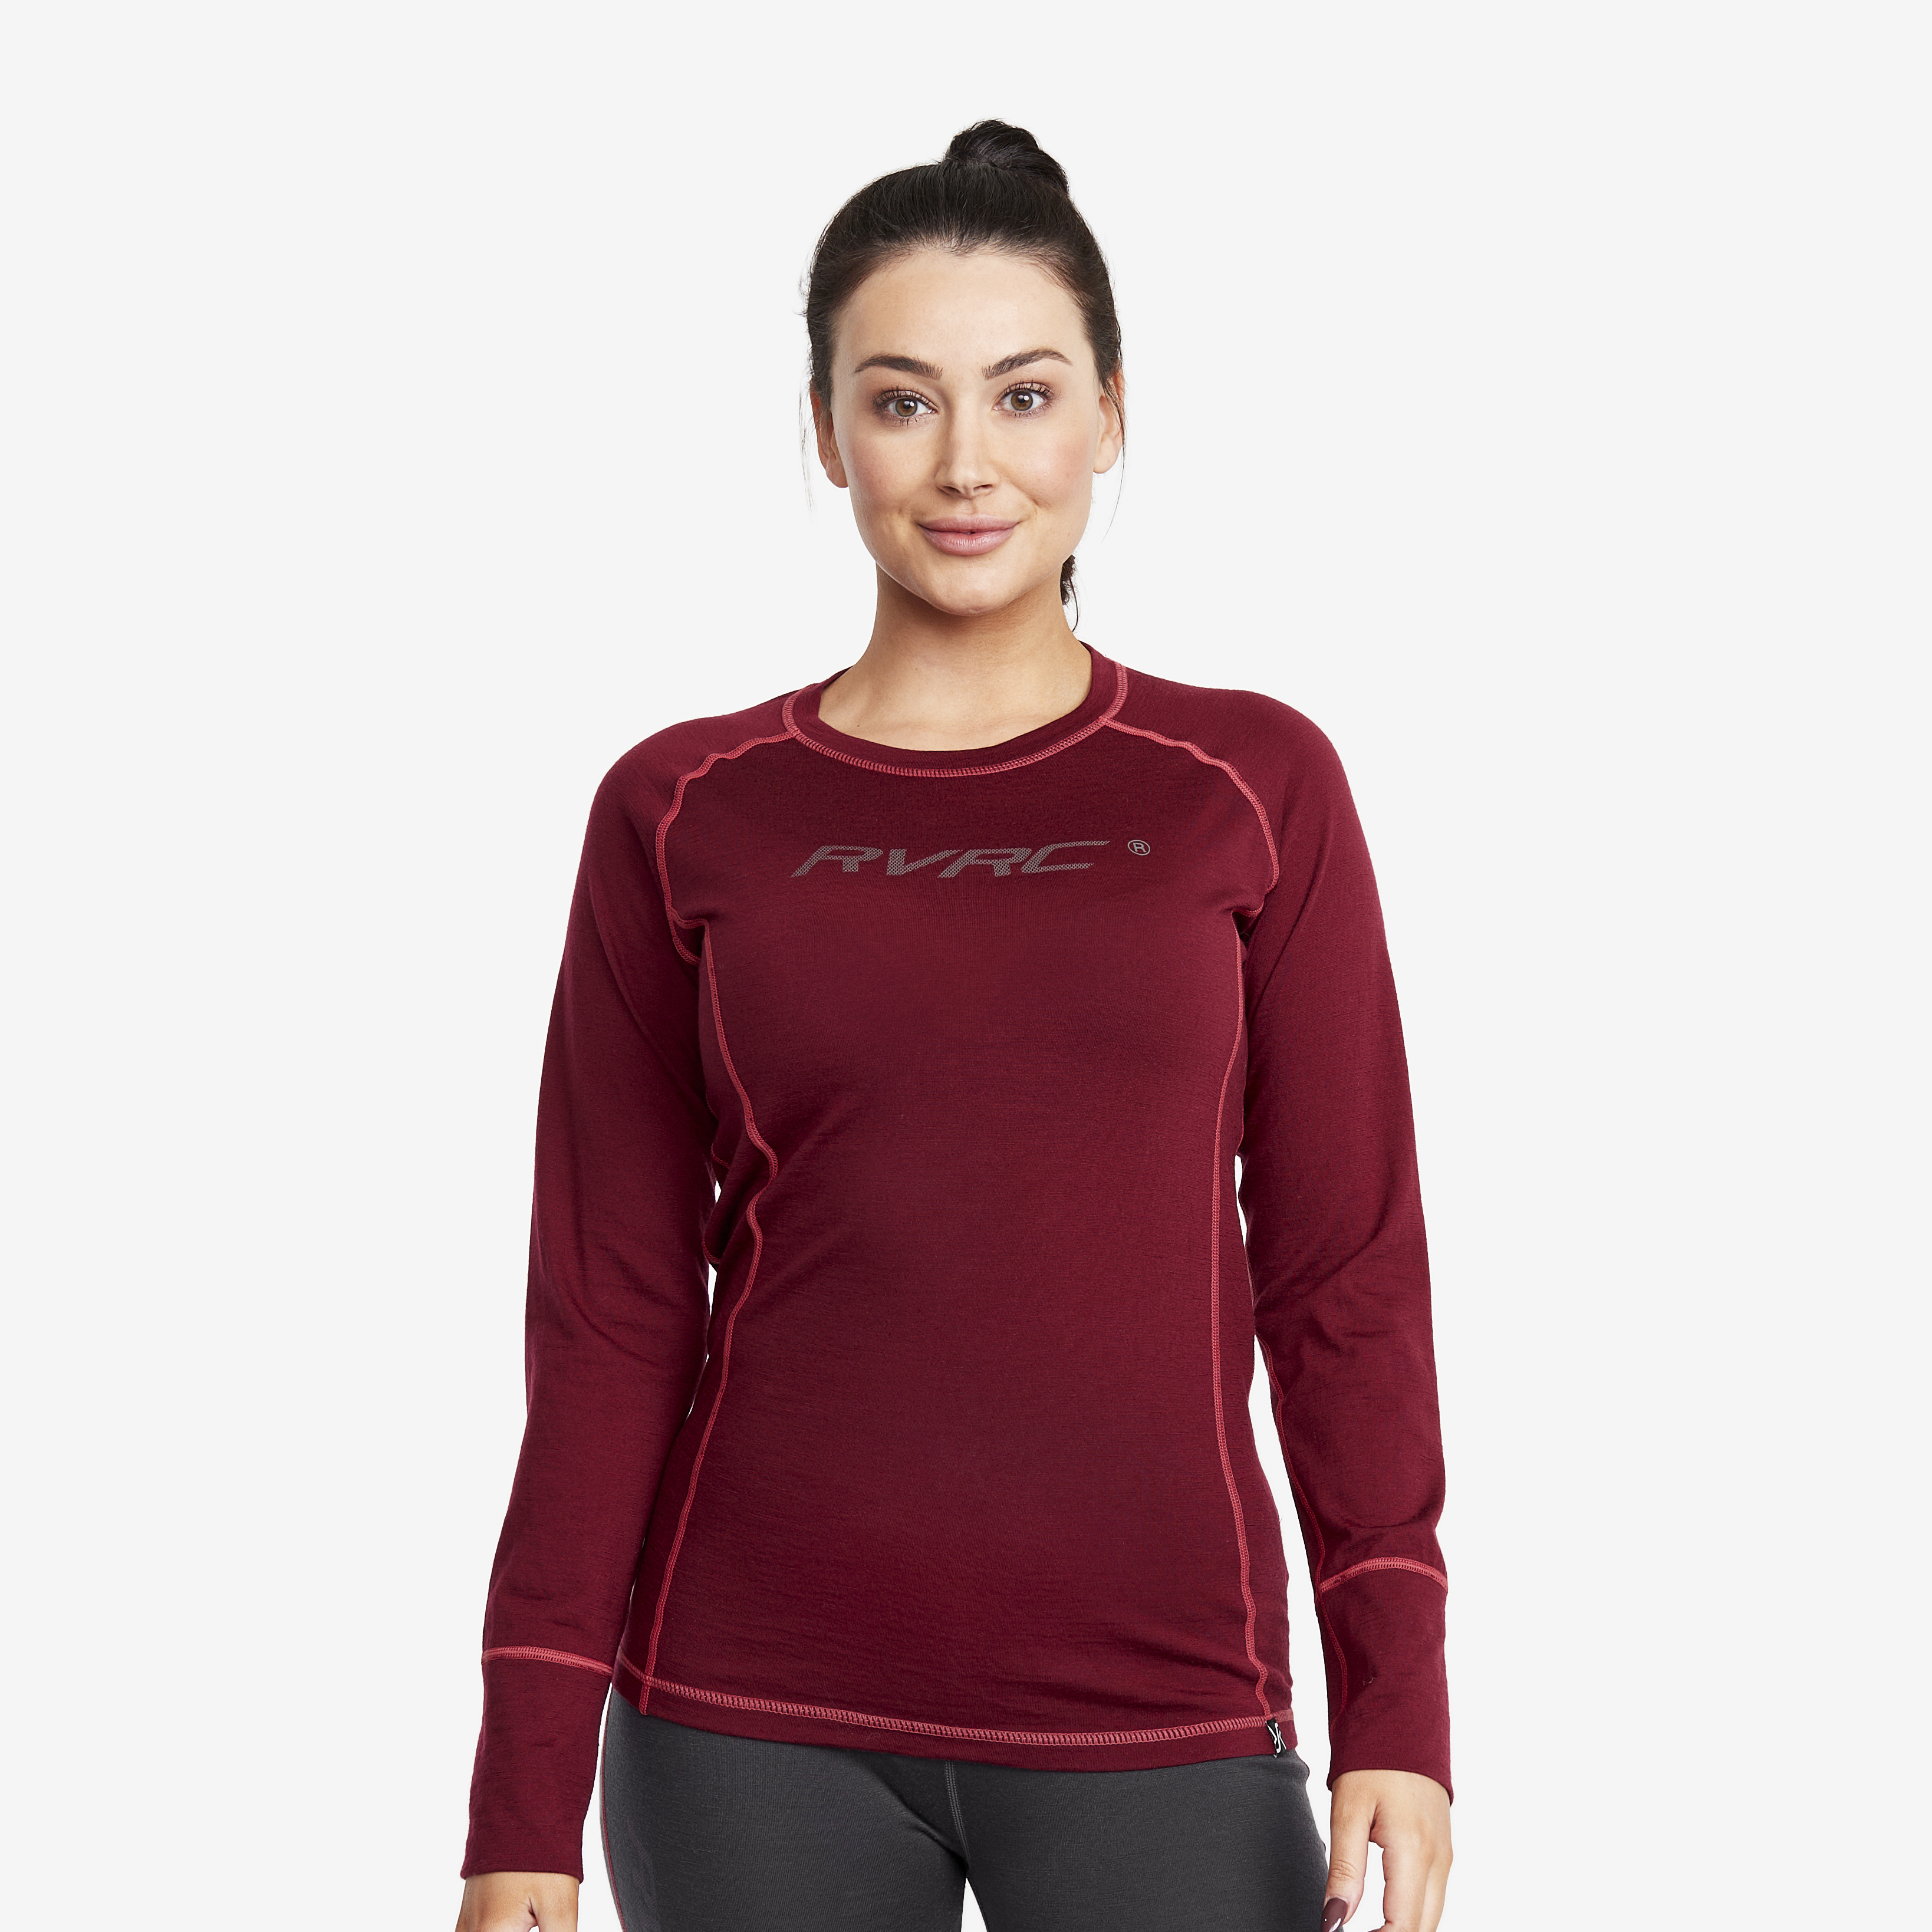 Outright Merino Top Bison Red/ Anthracite Donna